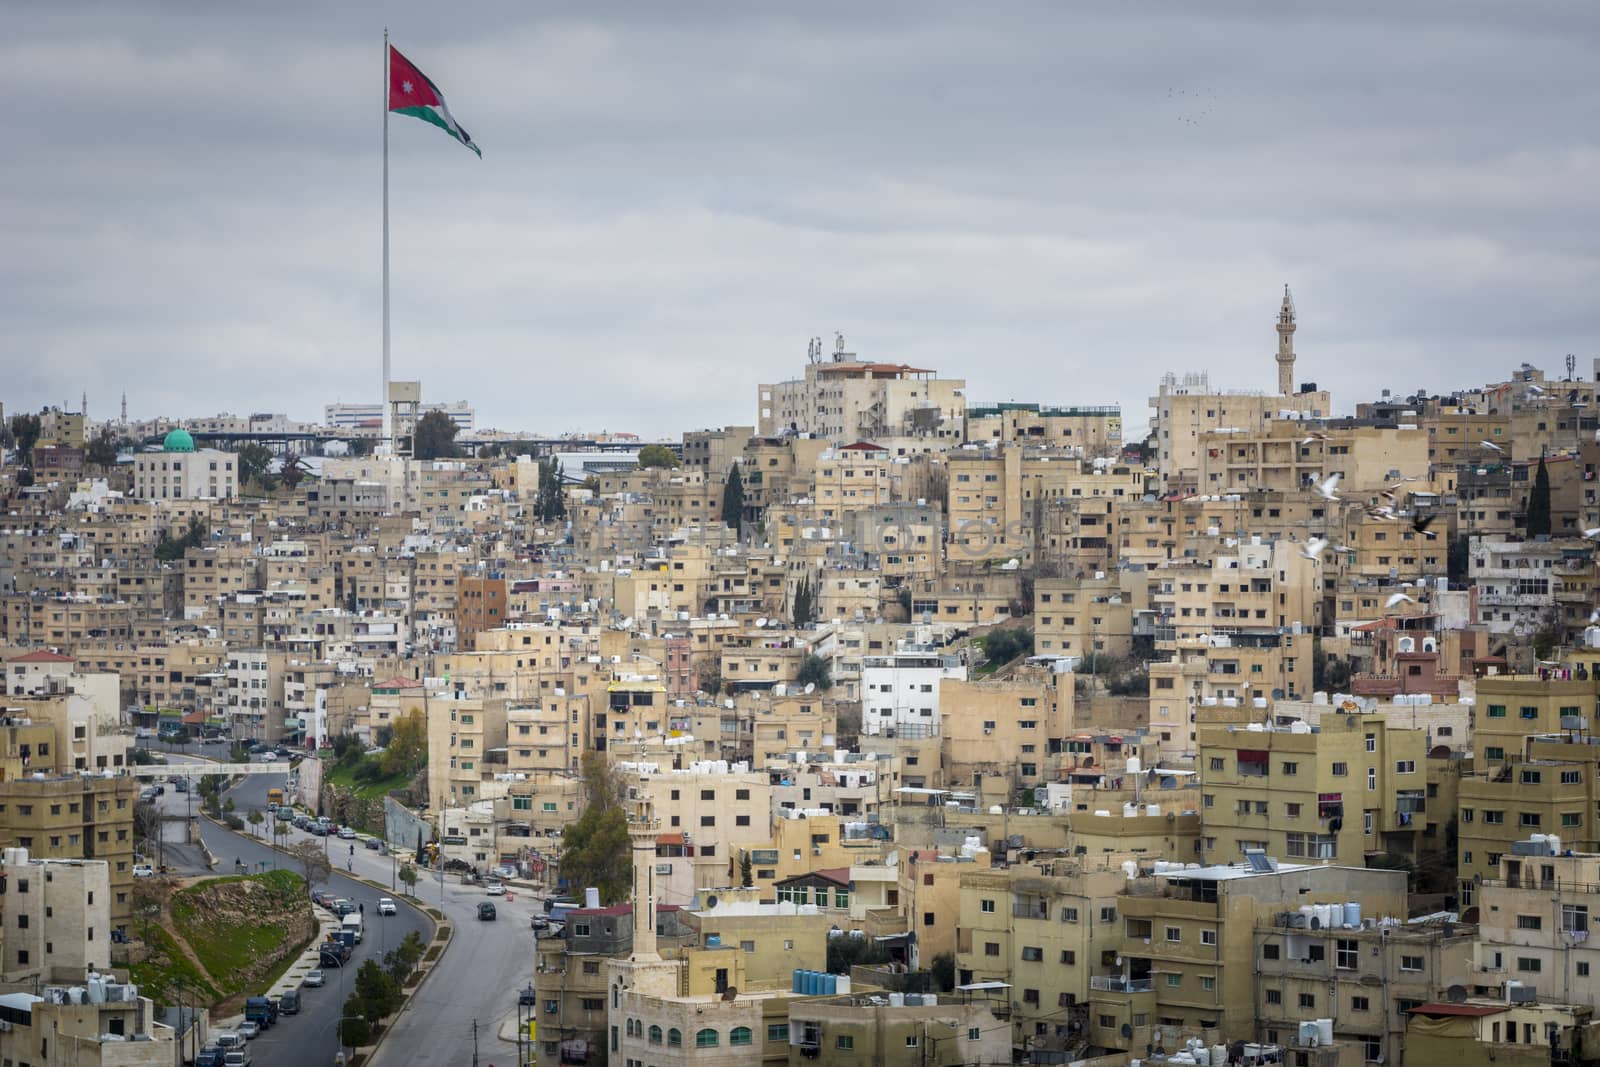 Cityscape and skyline of Amman in Jordan, with view on the Raghadan Flagpole by kb79